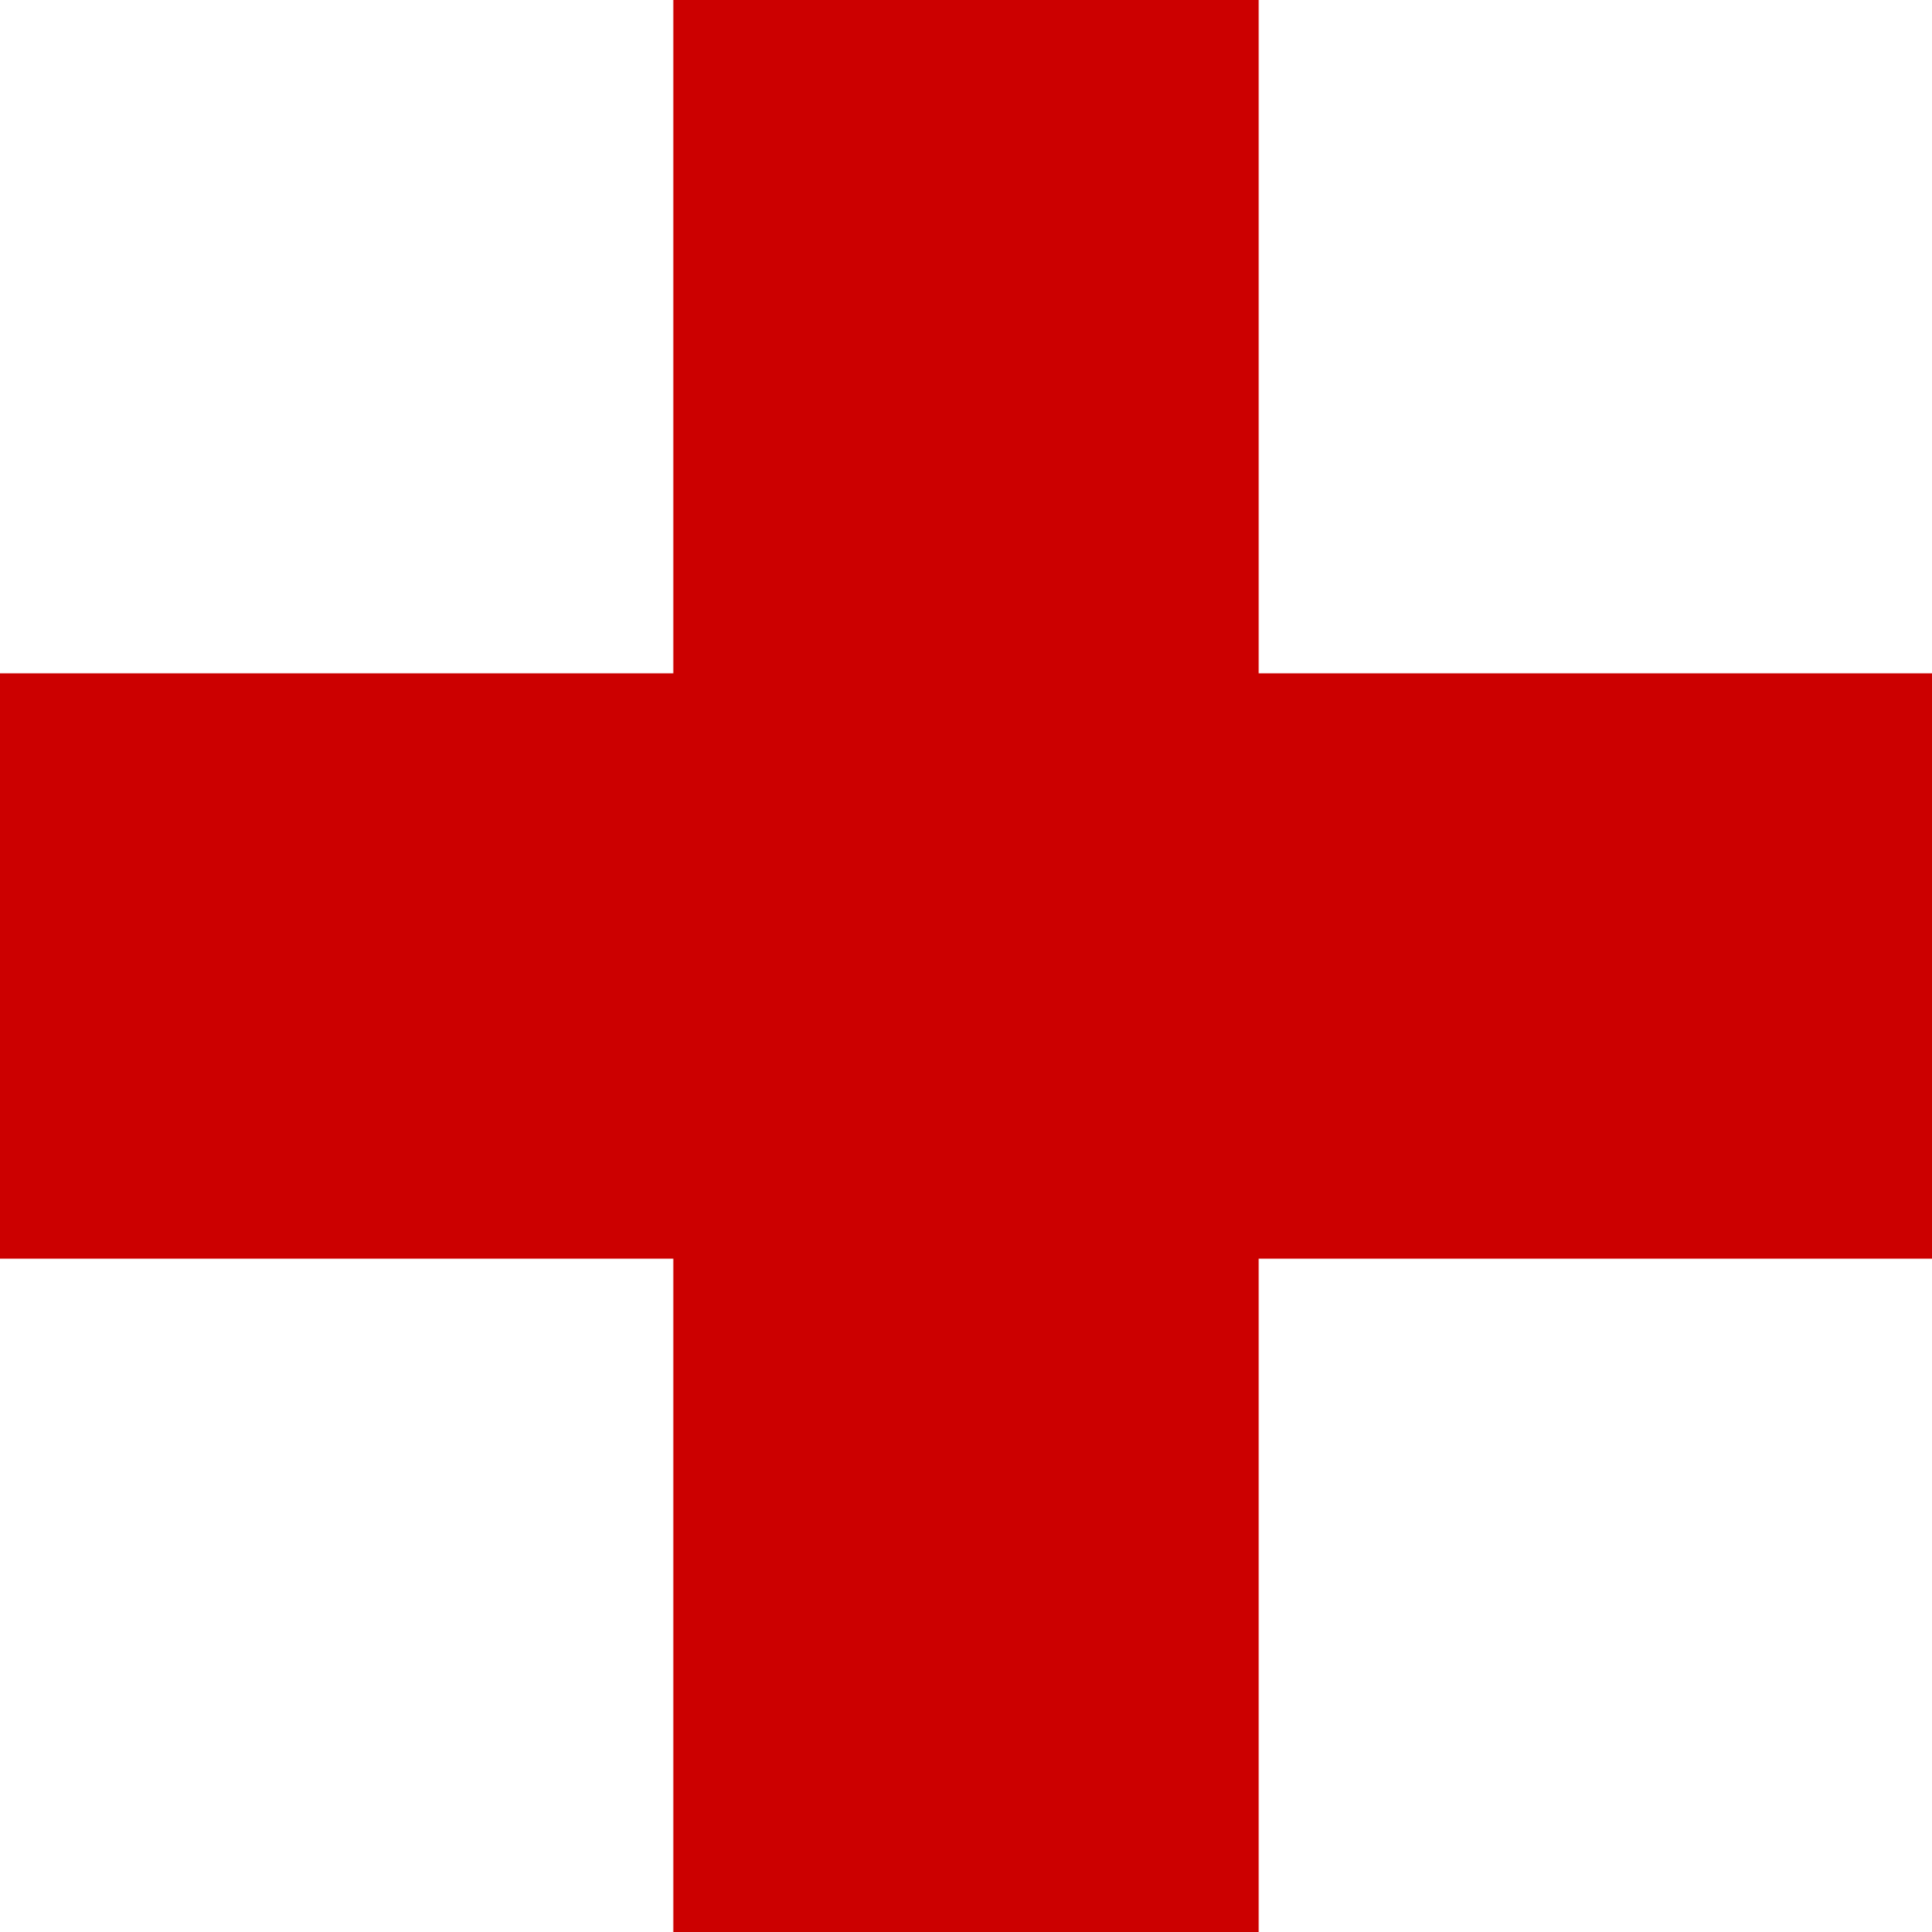 File:Red Cross icon.svg - Wikimedia Commons